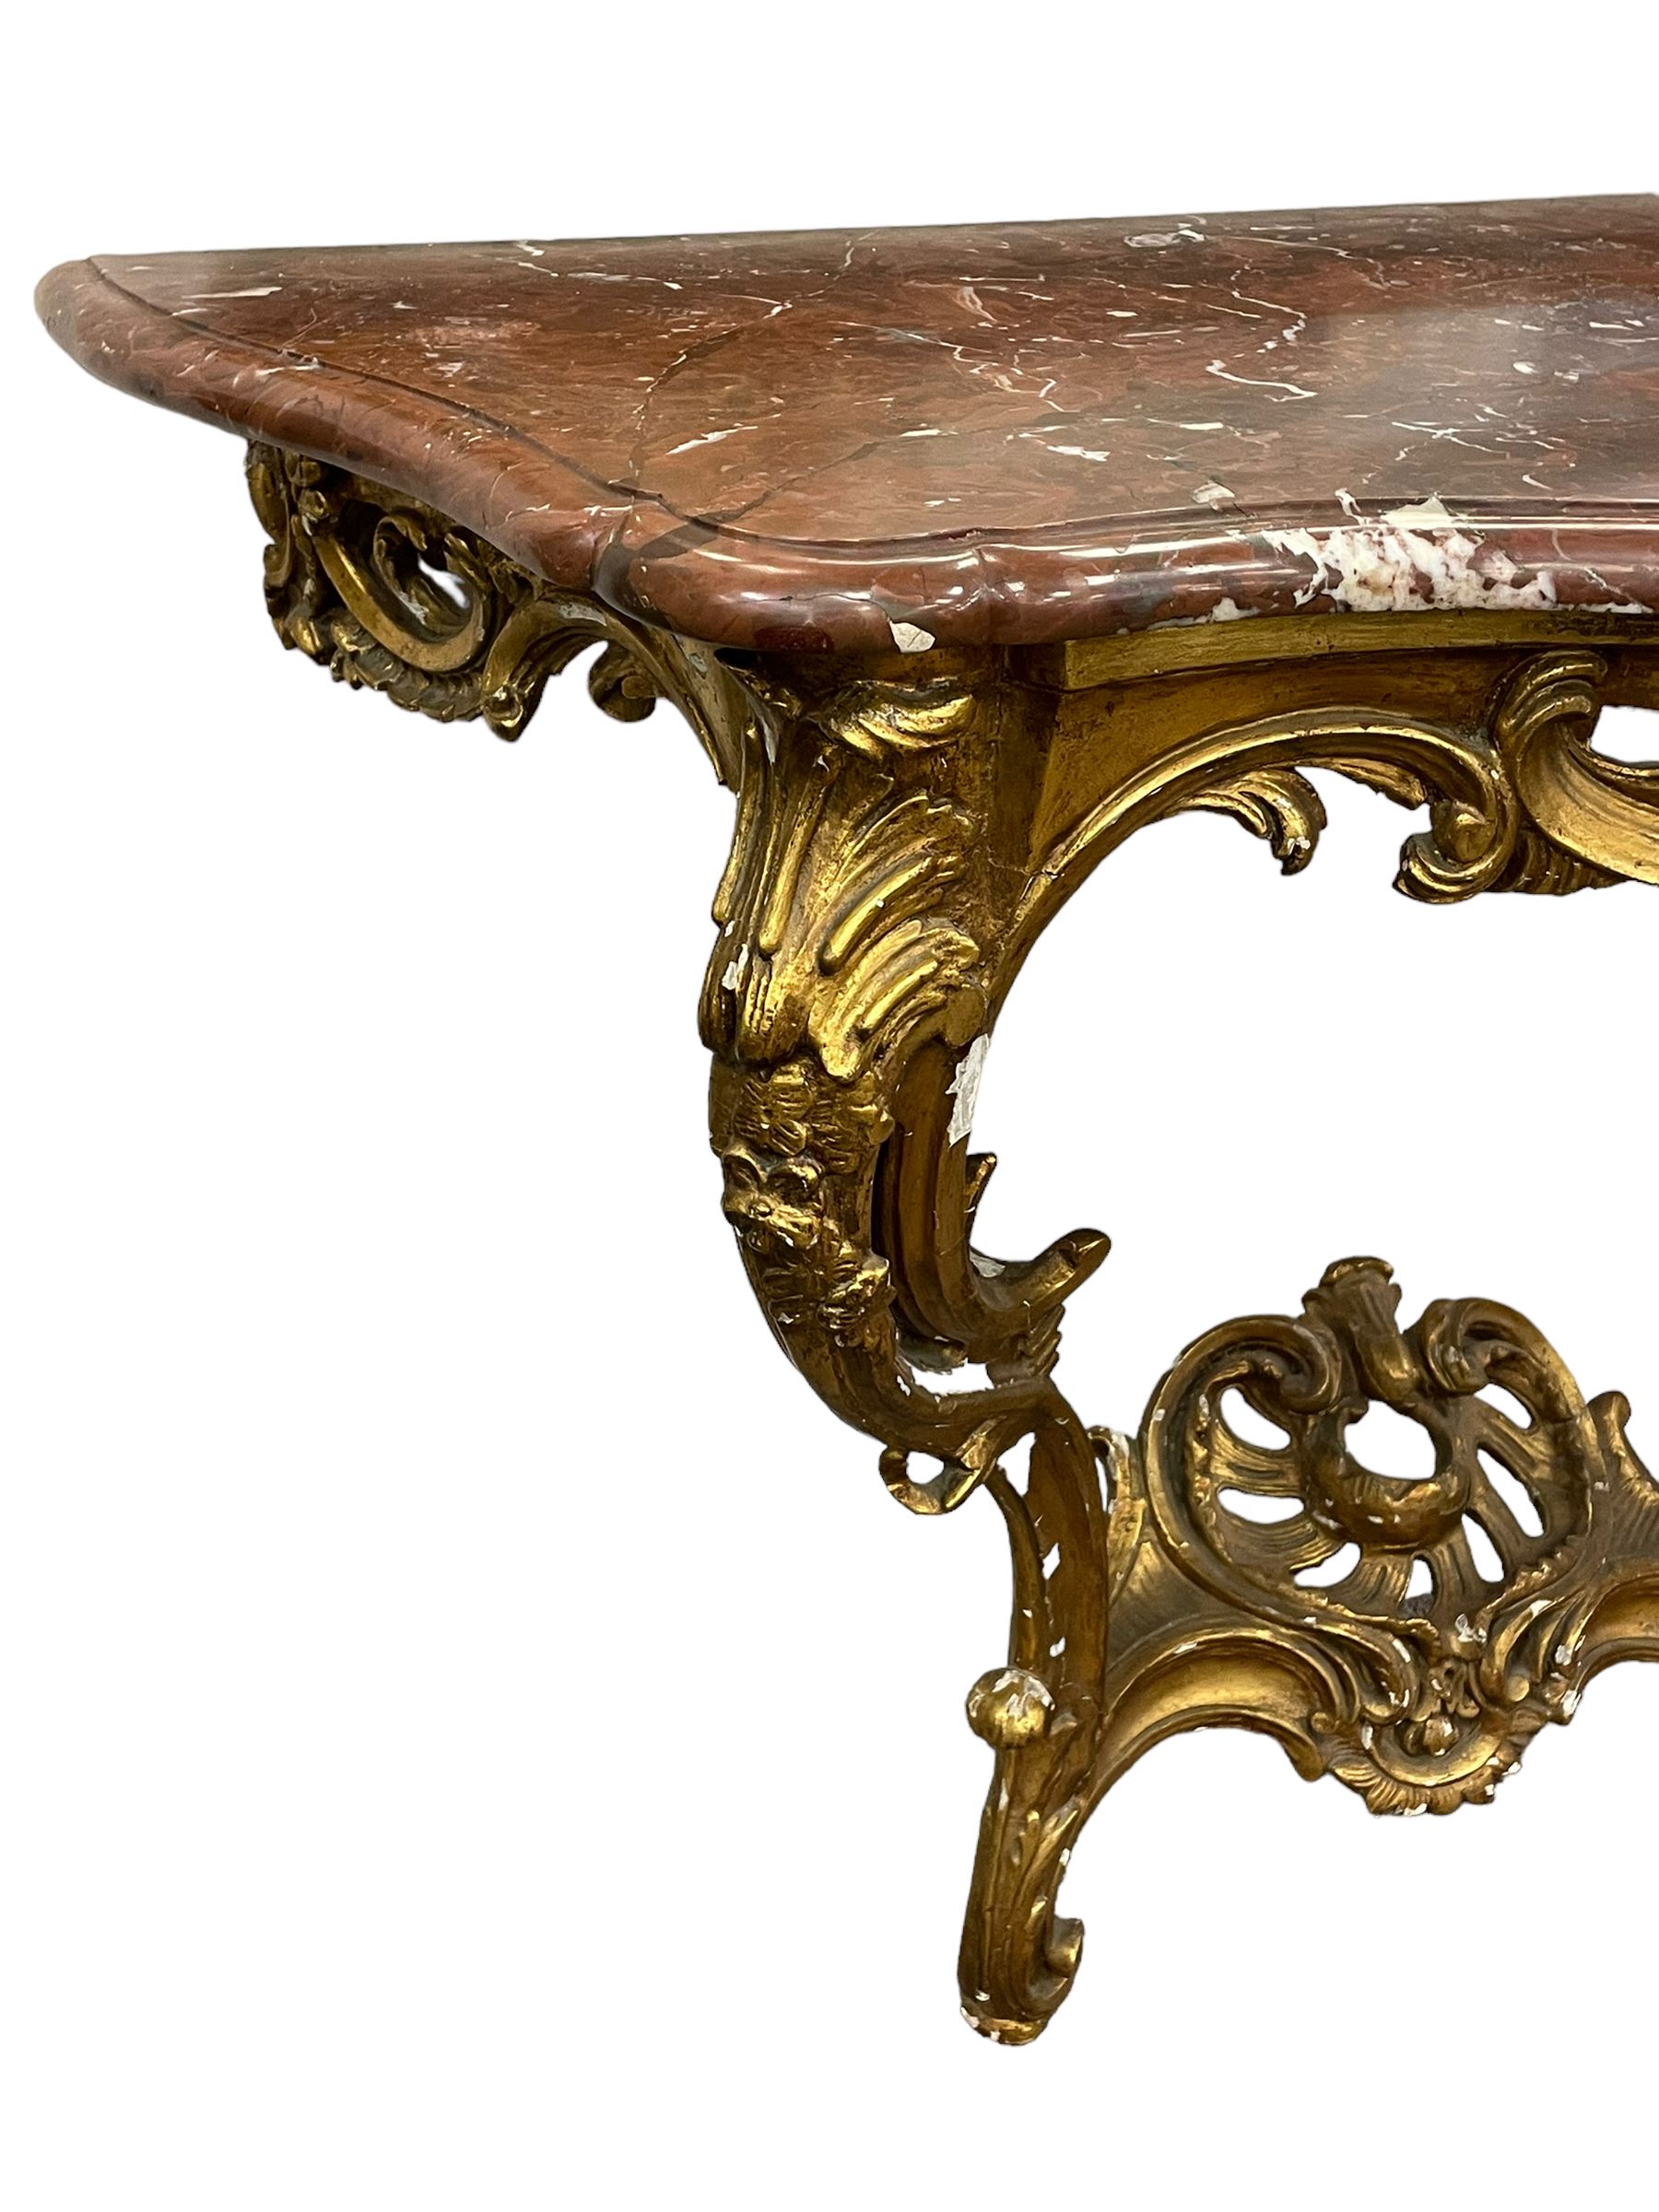 19th century giltwood and gesso console table and mirror - Image 3 of 12